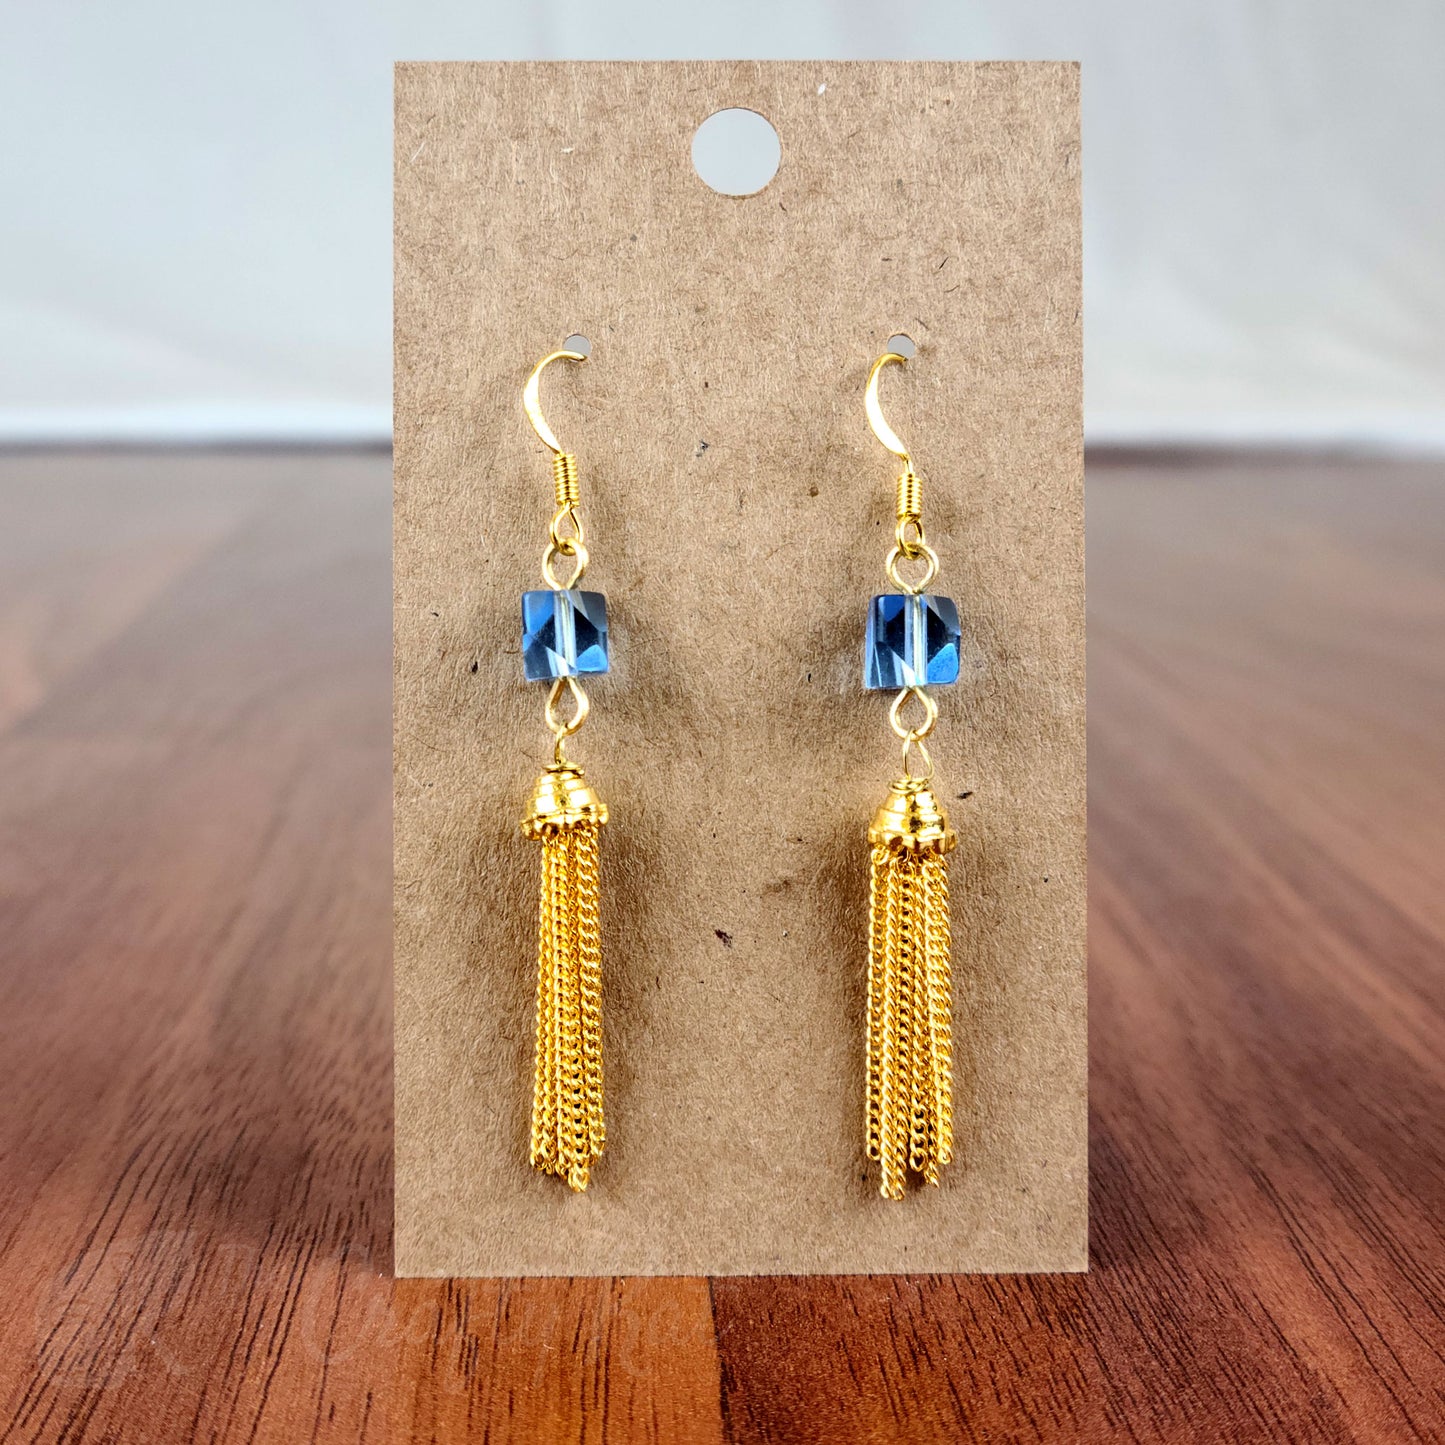 Drop earring featuring an ice blue angle-cut cube crystal bead and gold chain tassle and fittings